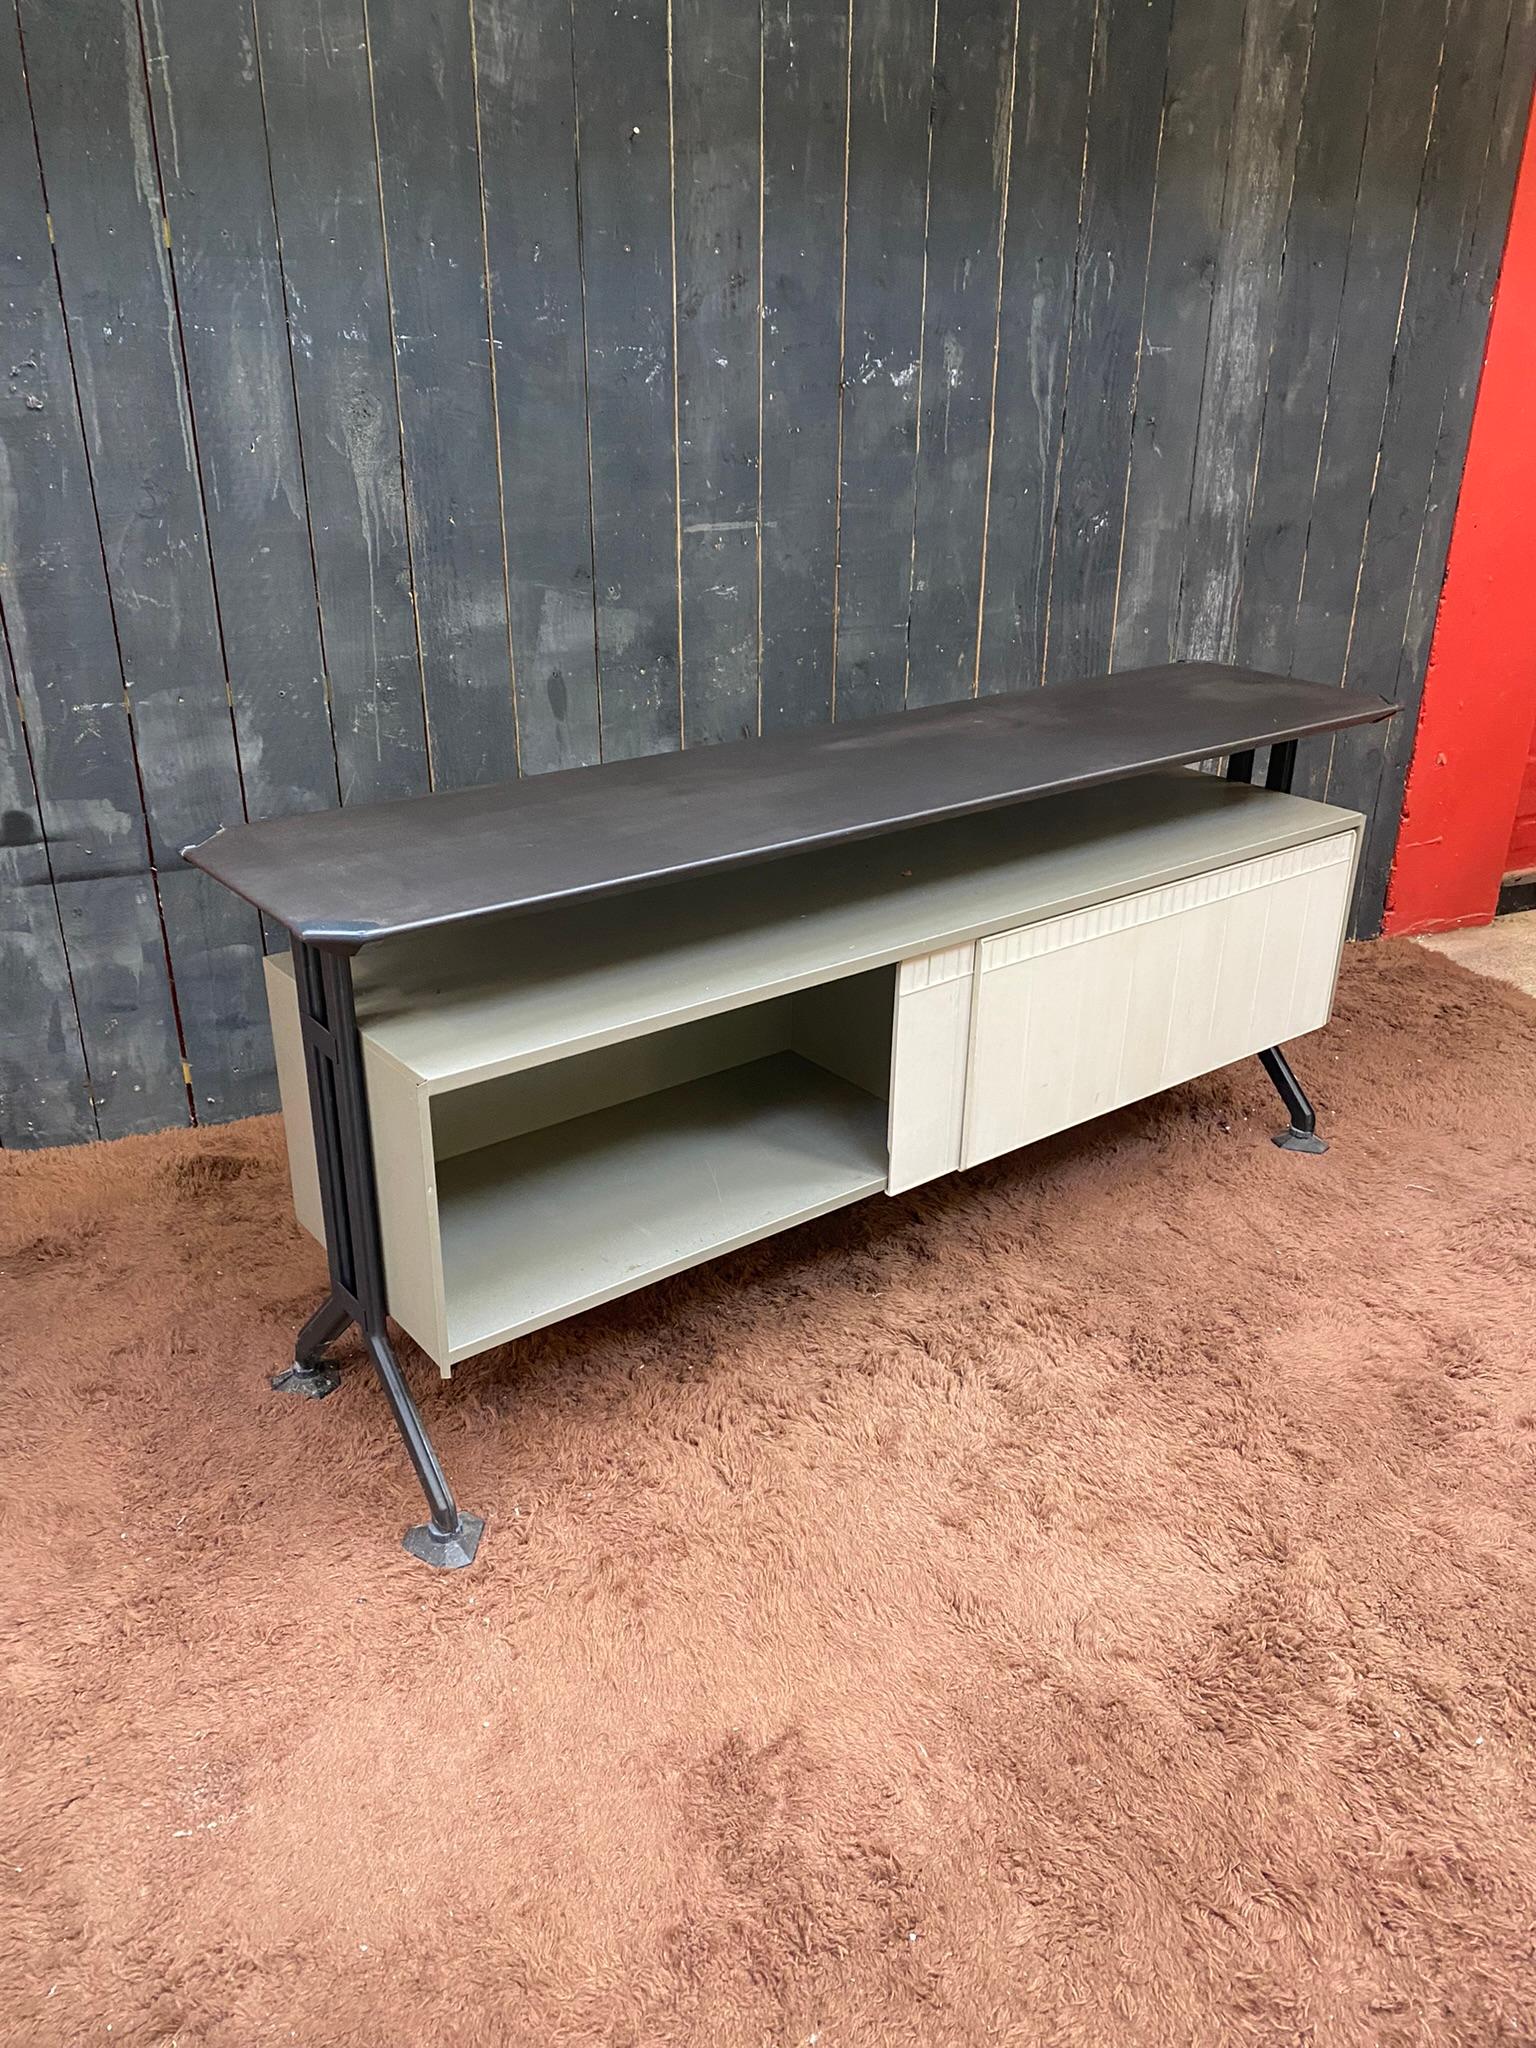 Metal Office Furniture by Bbpr for Olivetti Synthesis, circa 1960 For Sale